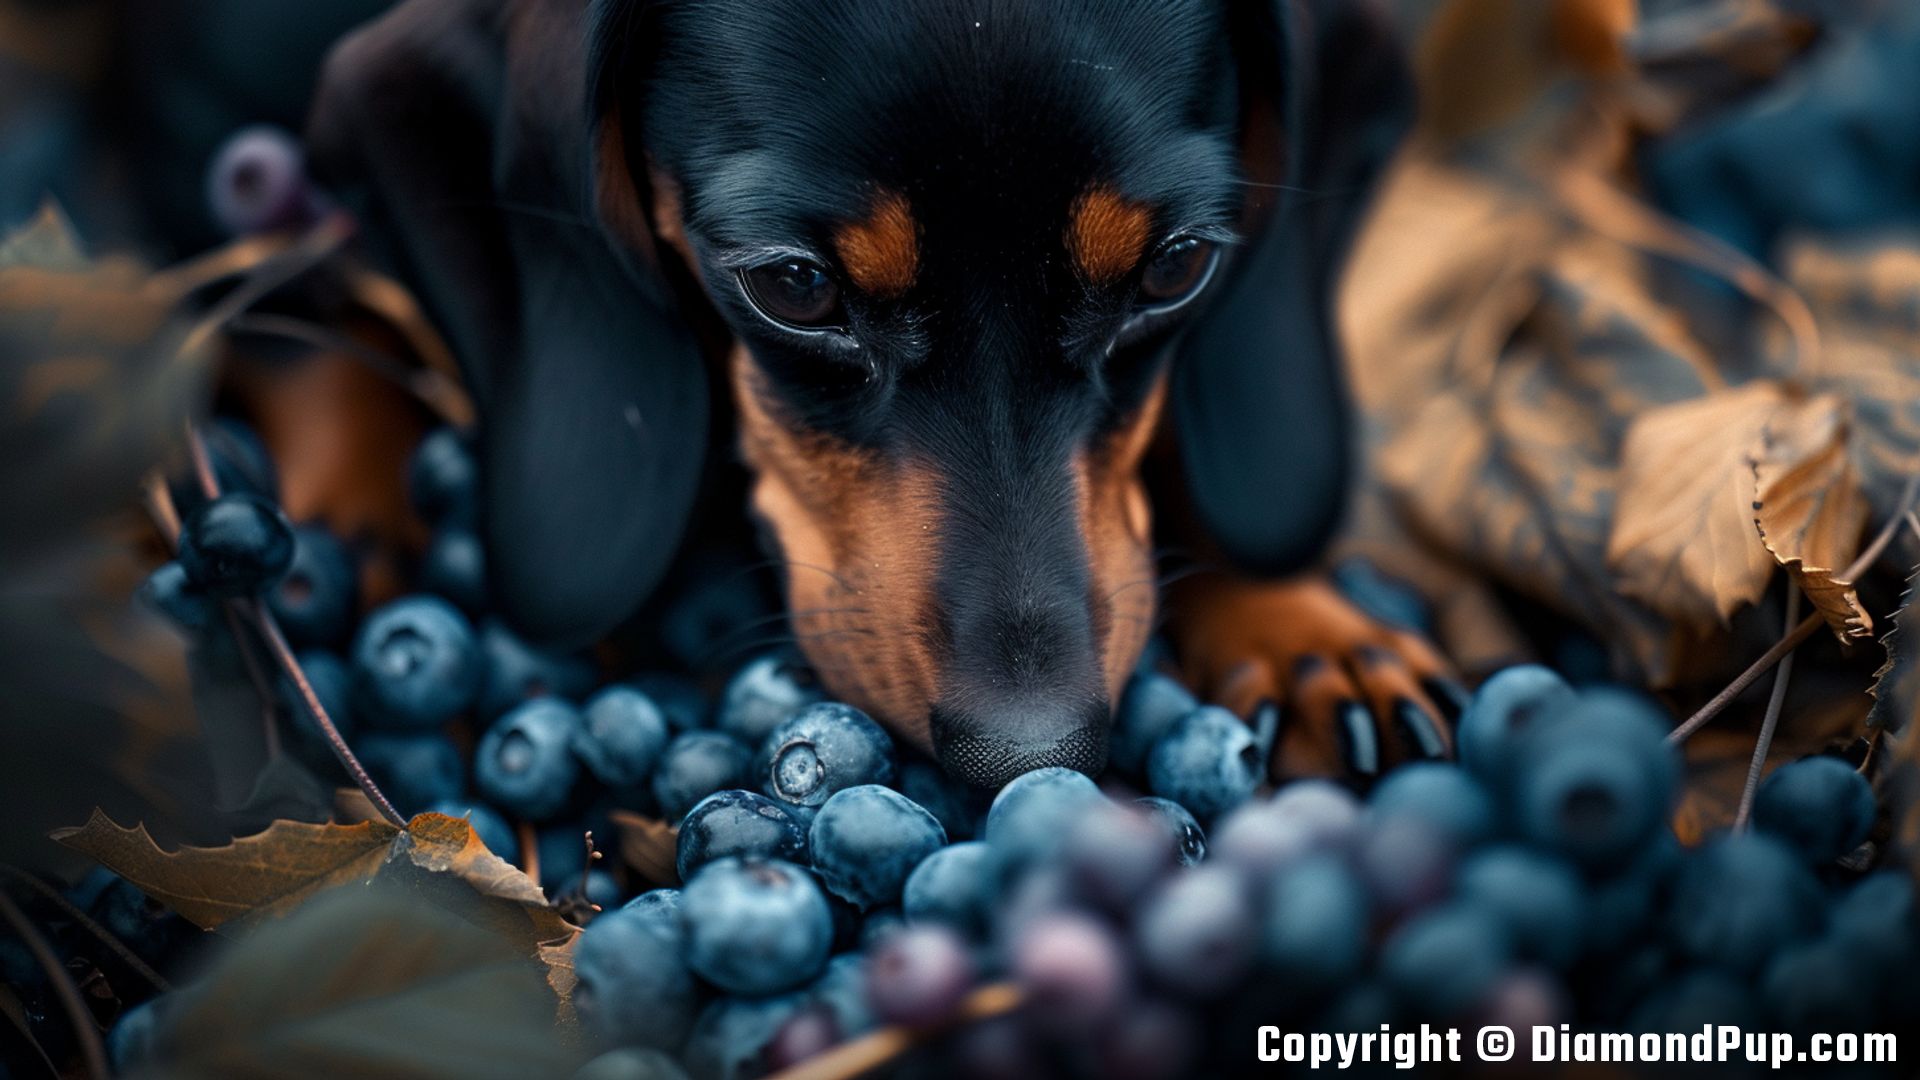 Photo of an Adorable Dachshund Eating Blueberries